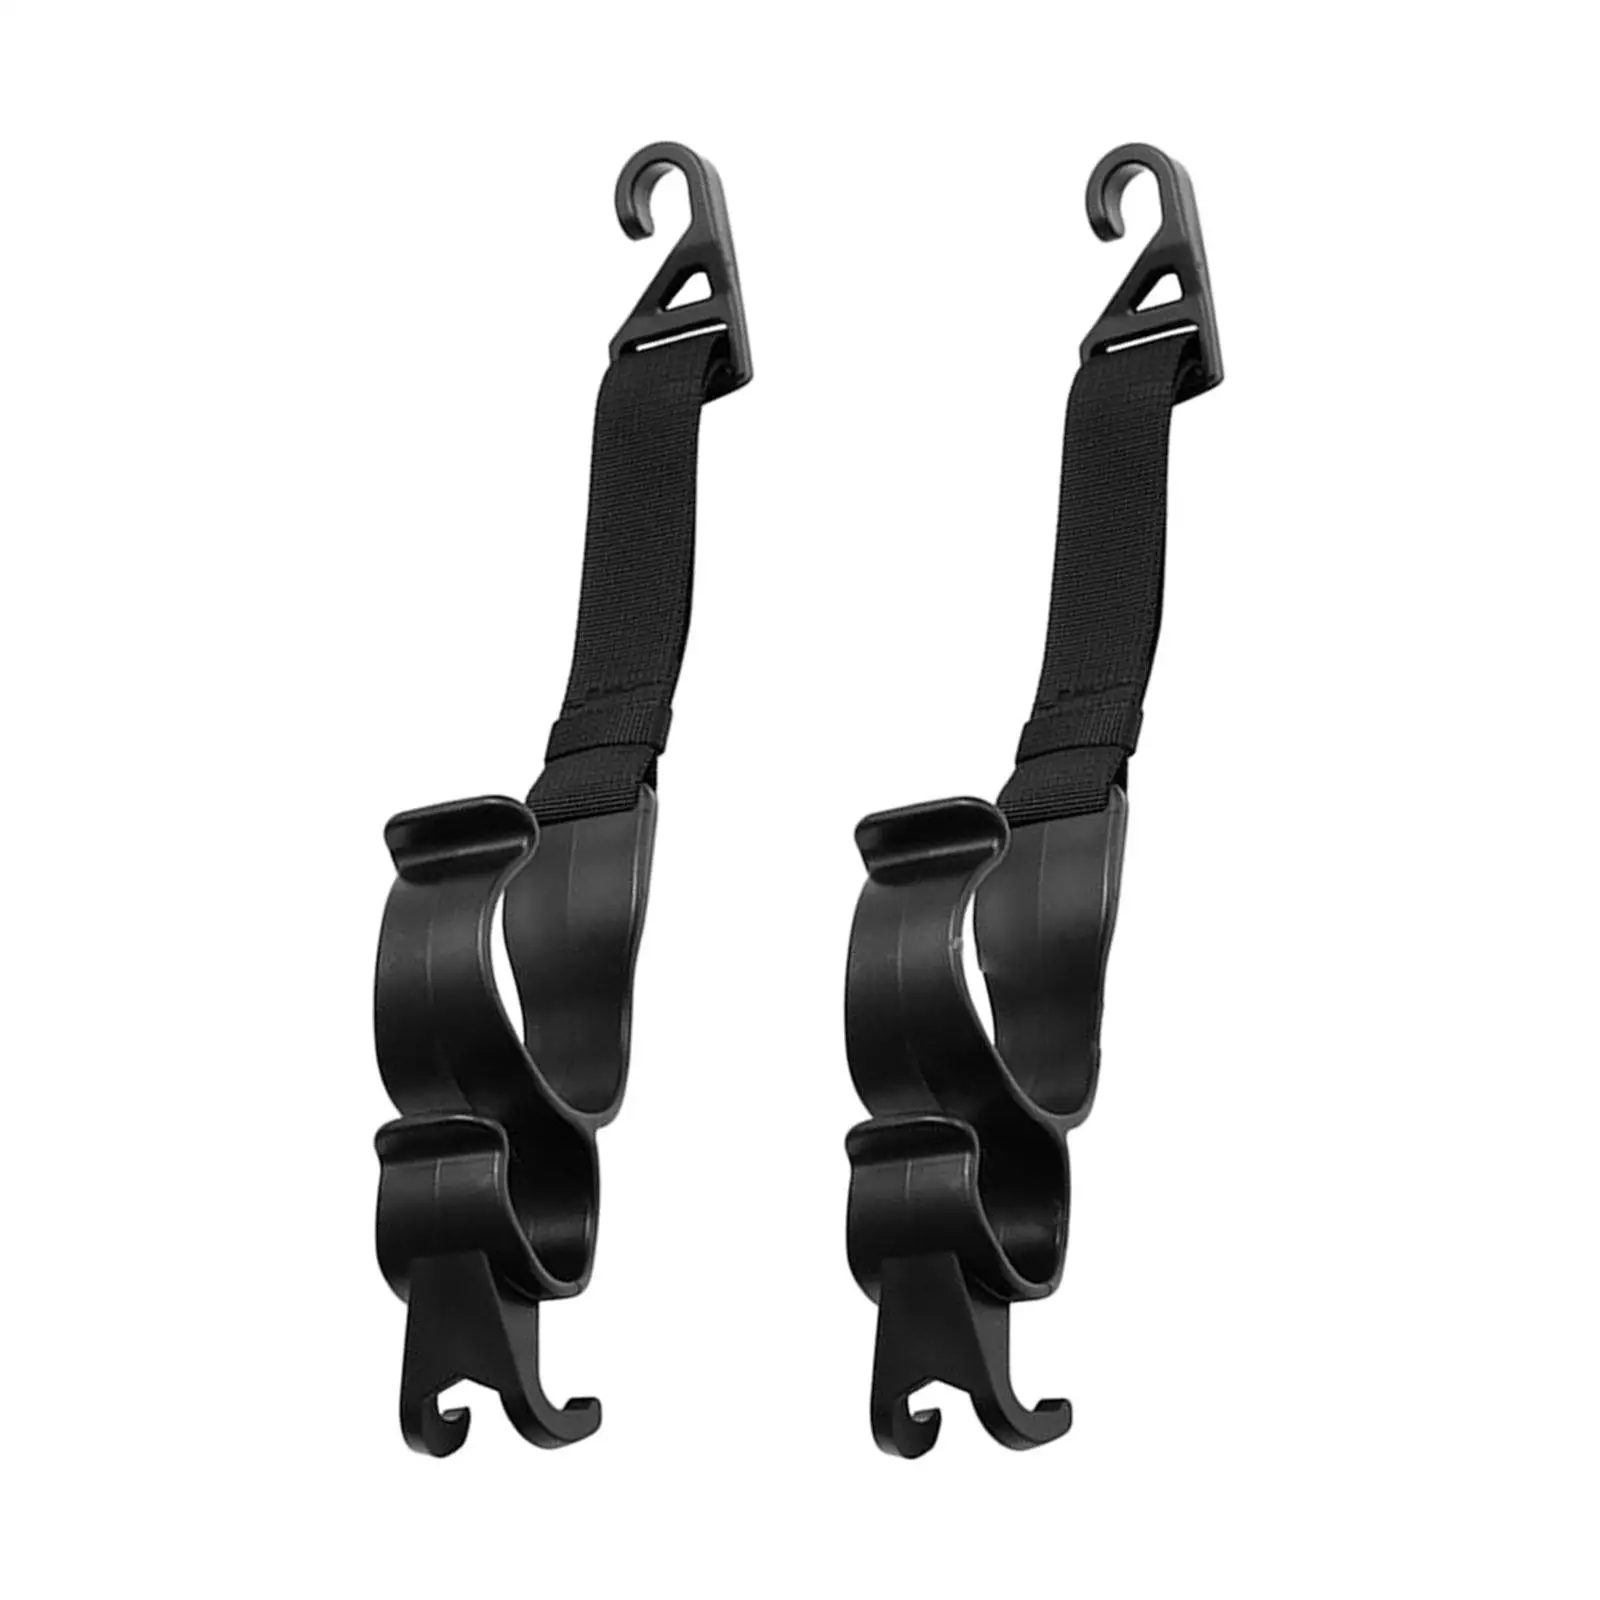 2 Pieces Car Seat Hooks Durable Three hooks Strong Heavy Duty Seat Back Hook Hanger for Hats Backpacks Water Bottles